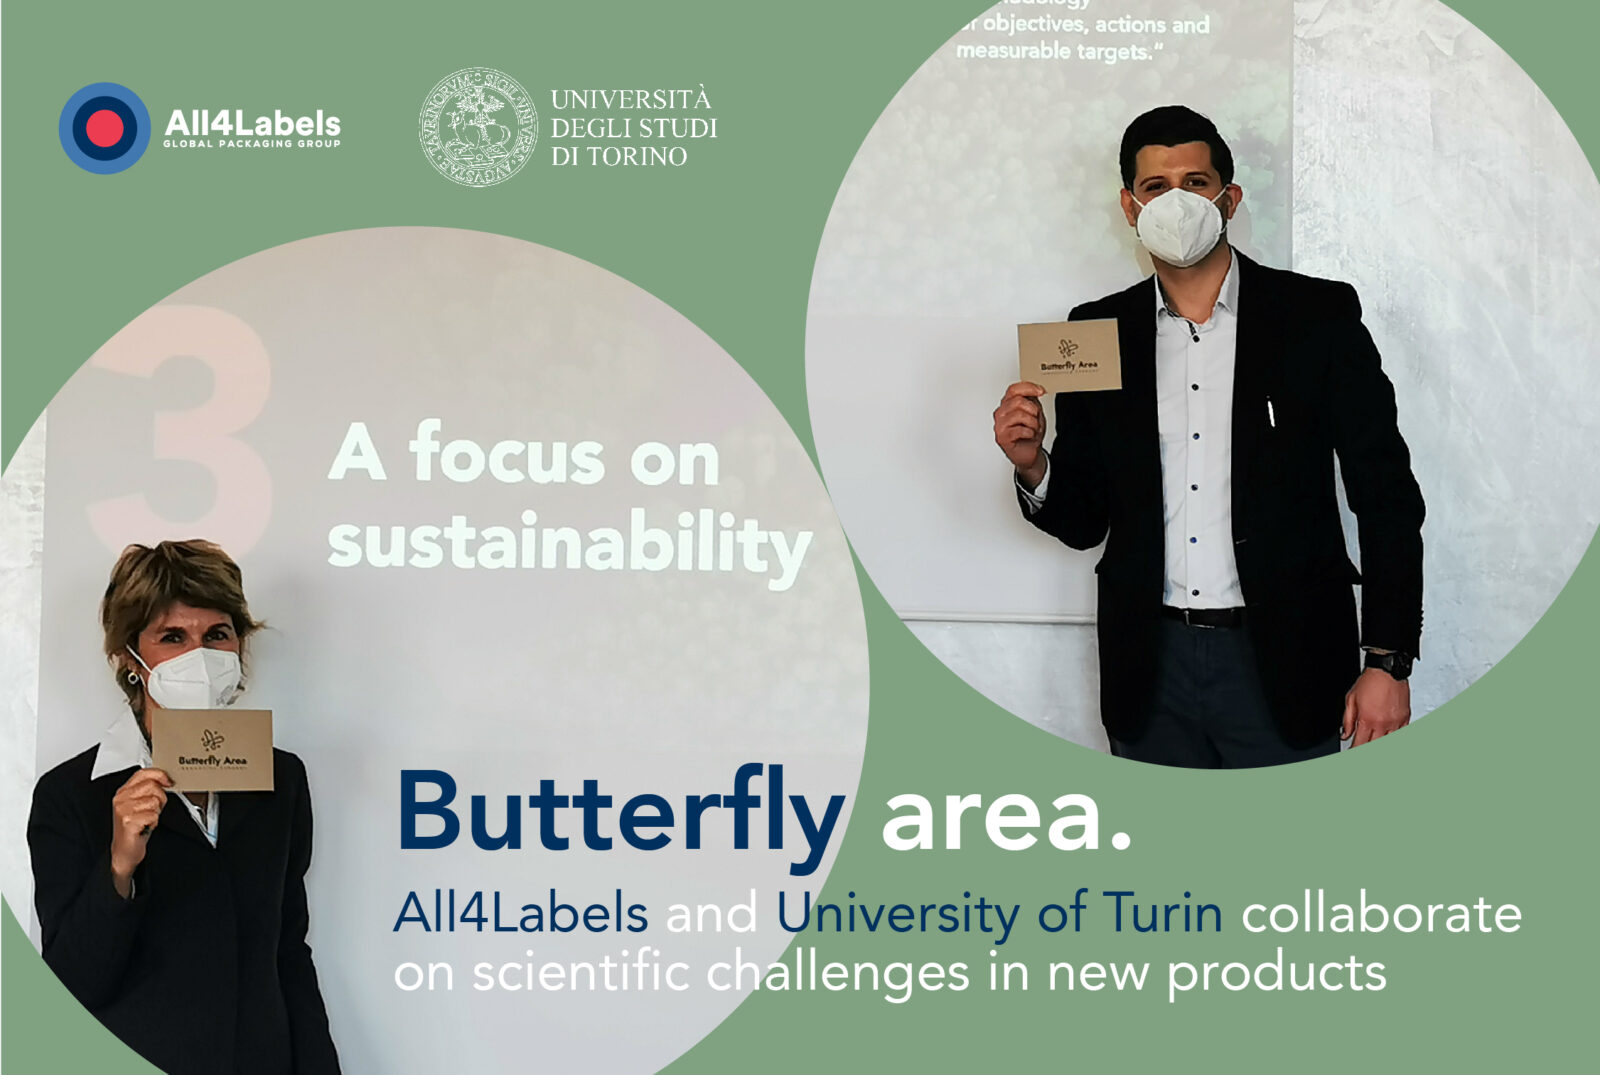 All4Labels and University of Turin collaborate on scientific challenges in new sustainable products